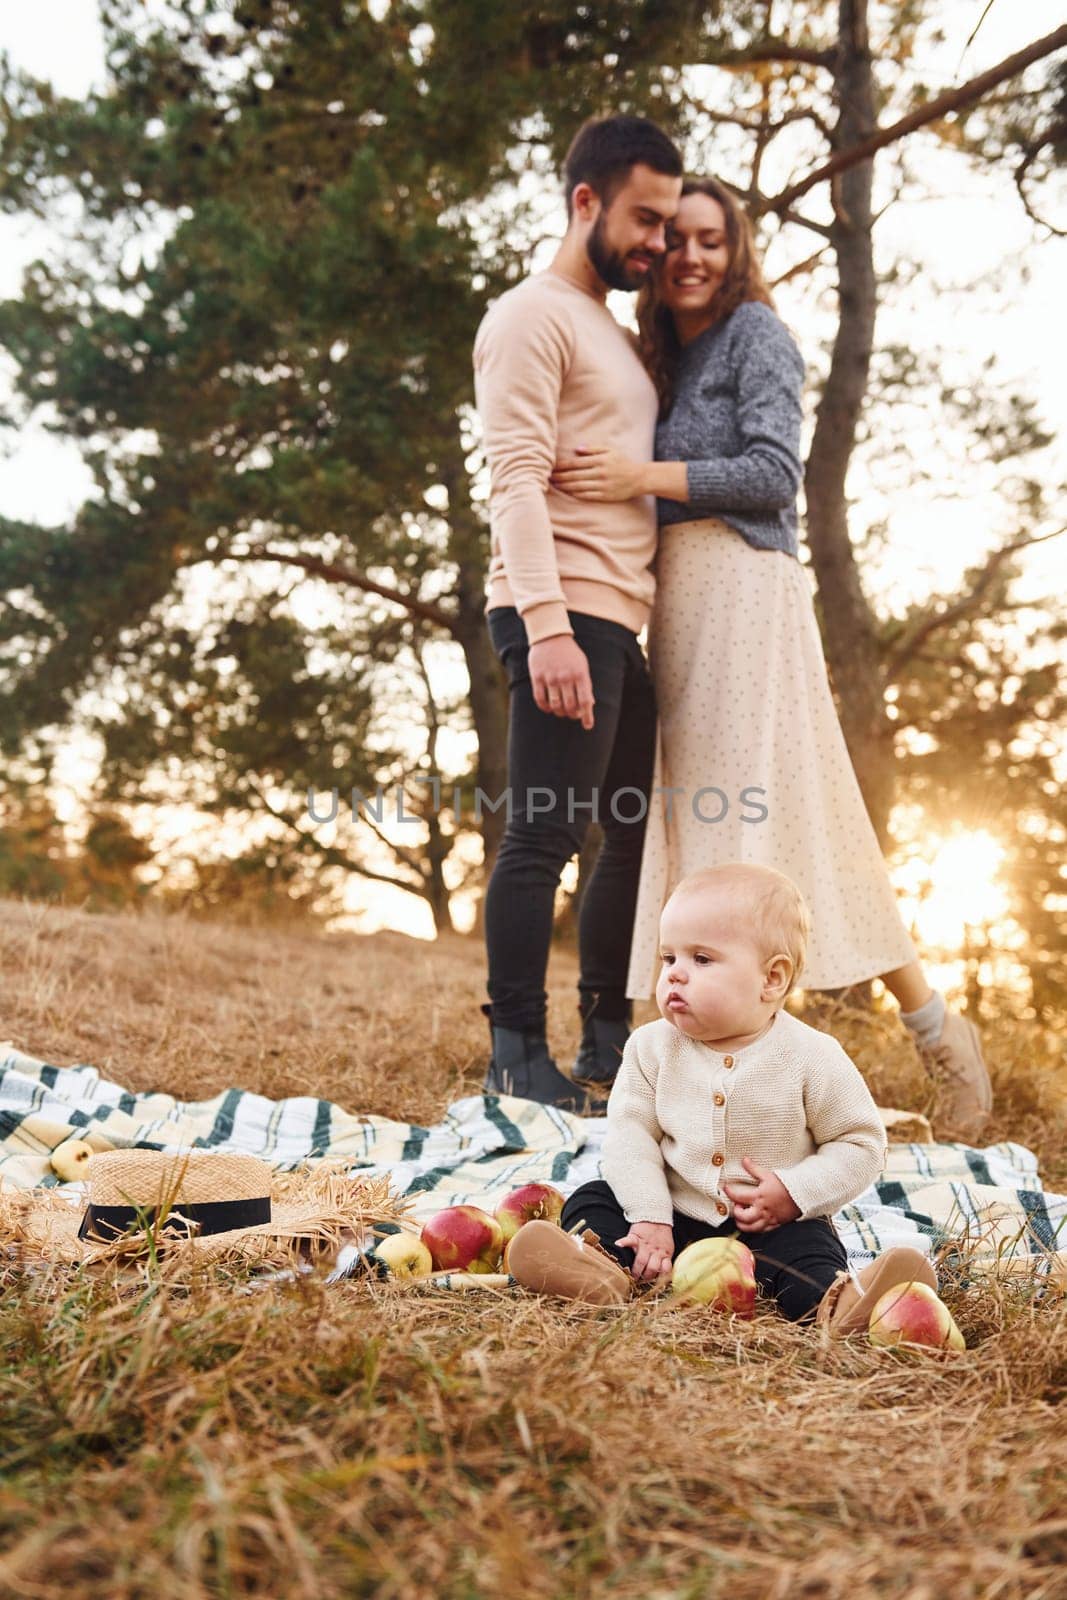 Haves picnic. Happy family of mother, family and little baby rests outdoors. Beautiful sunny autumn nature.